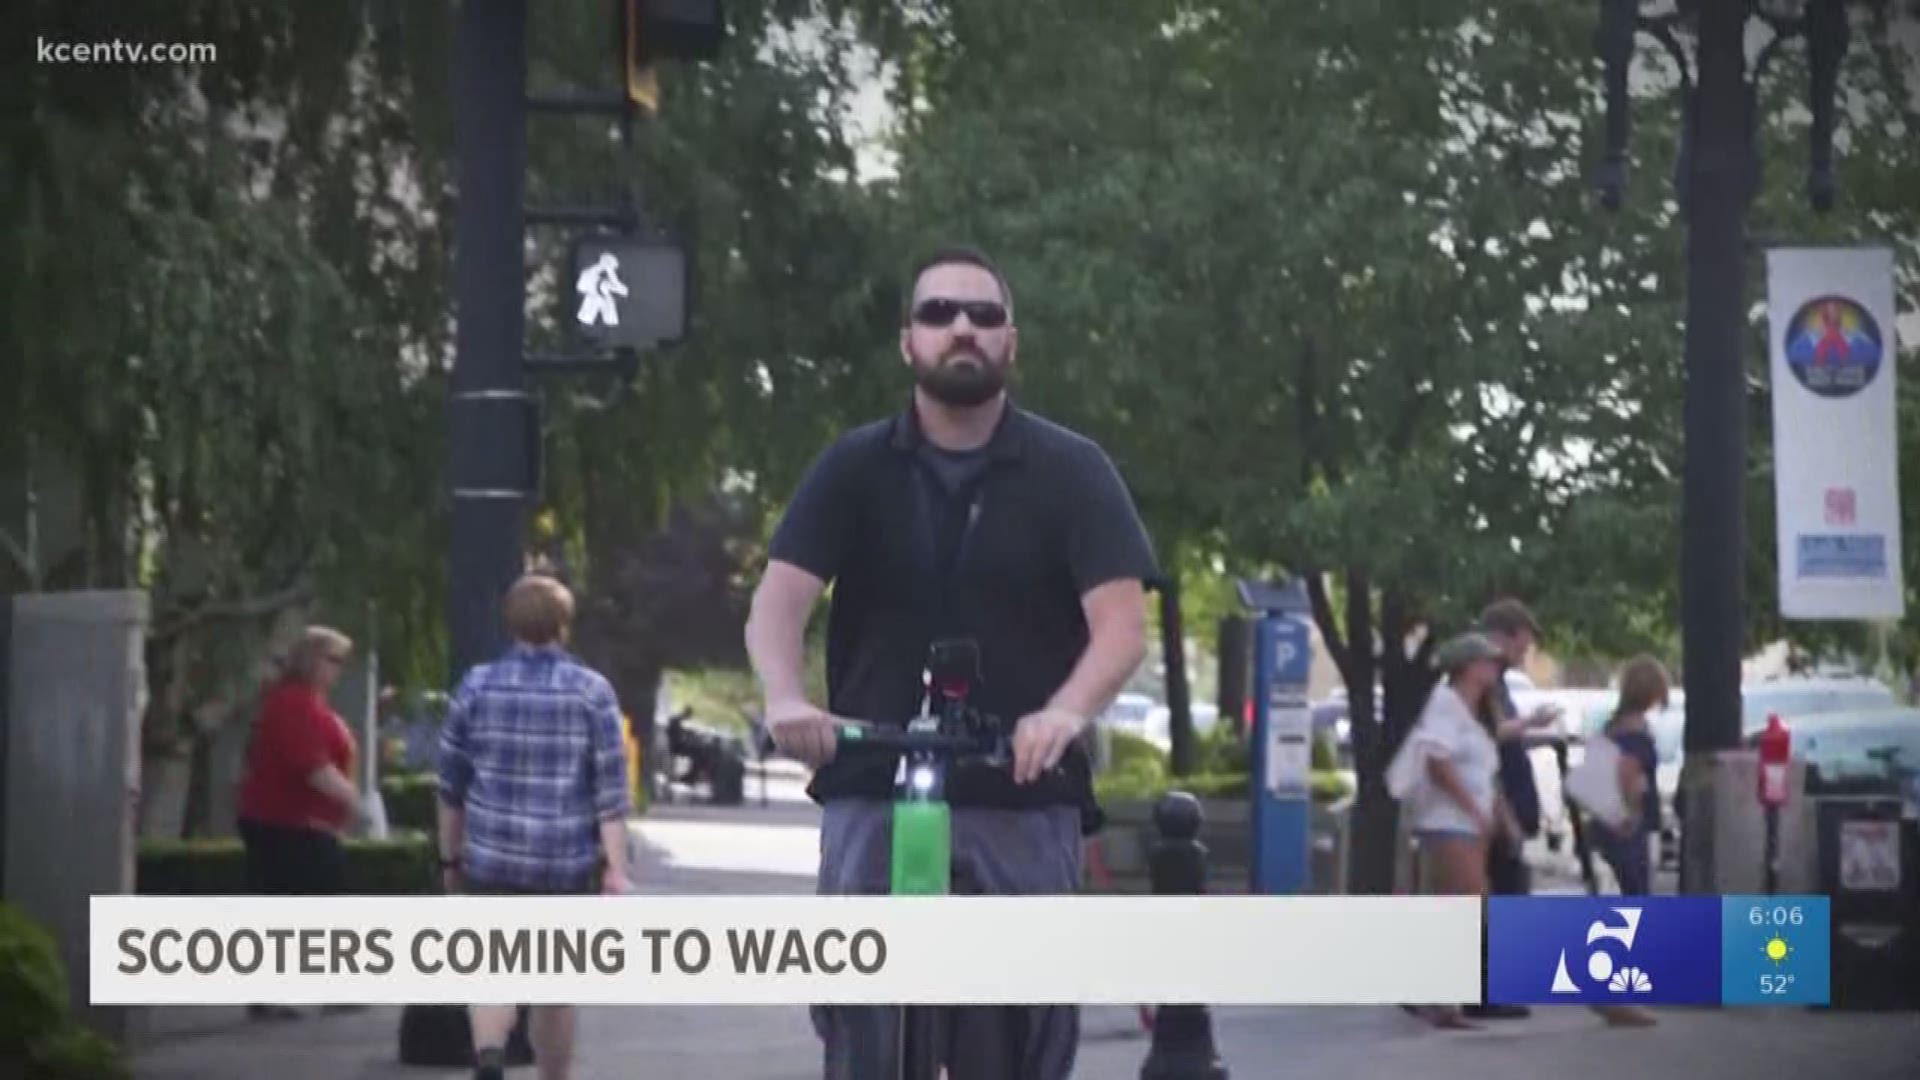 This will not be the first time the electronic scooters have landed in Waco. The company, Bird, first appeared in Waco in August, but it was unregulated by the city.